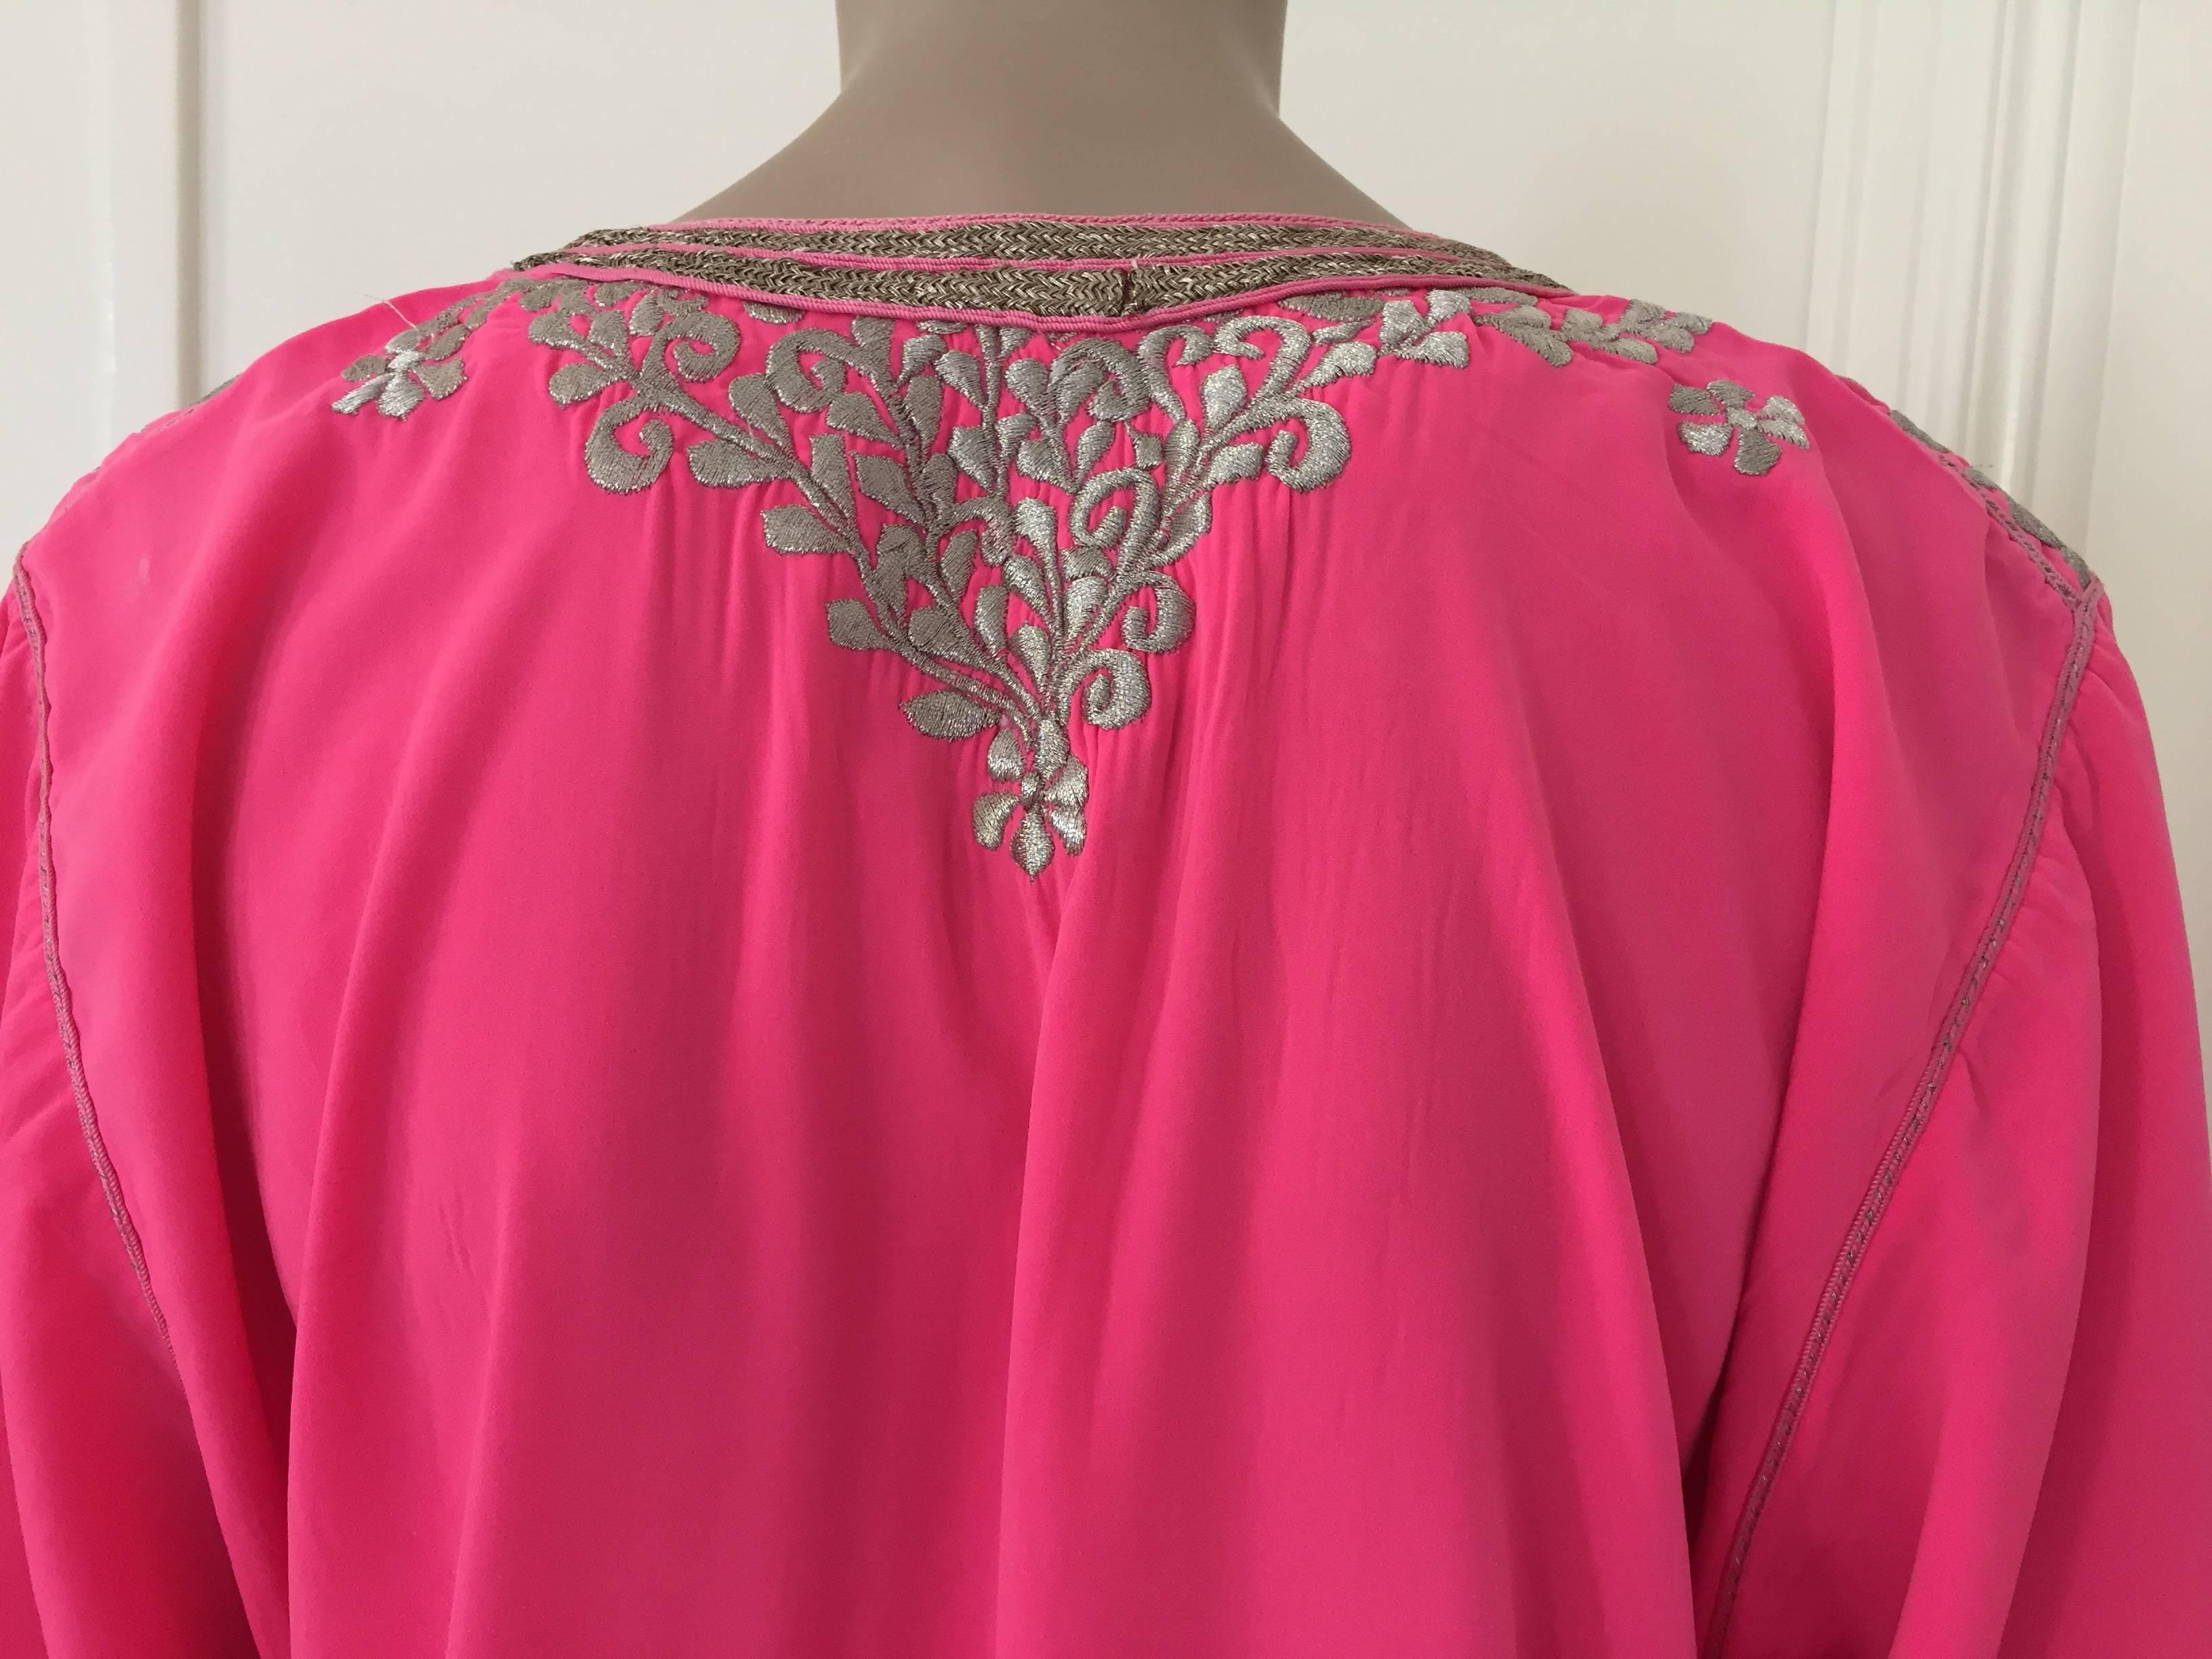 Moroccan Hot Pink Caftan with Silver Embroideries Maxi Dress Kaftan Size L to XL 2